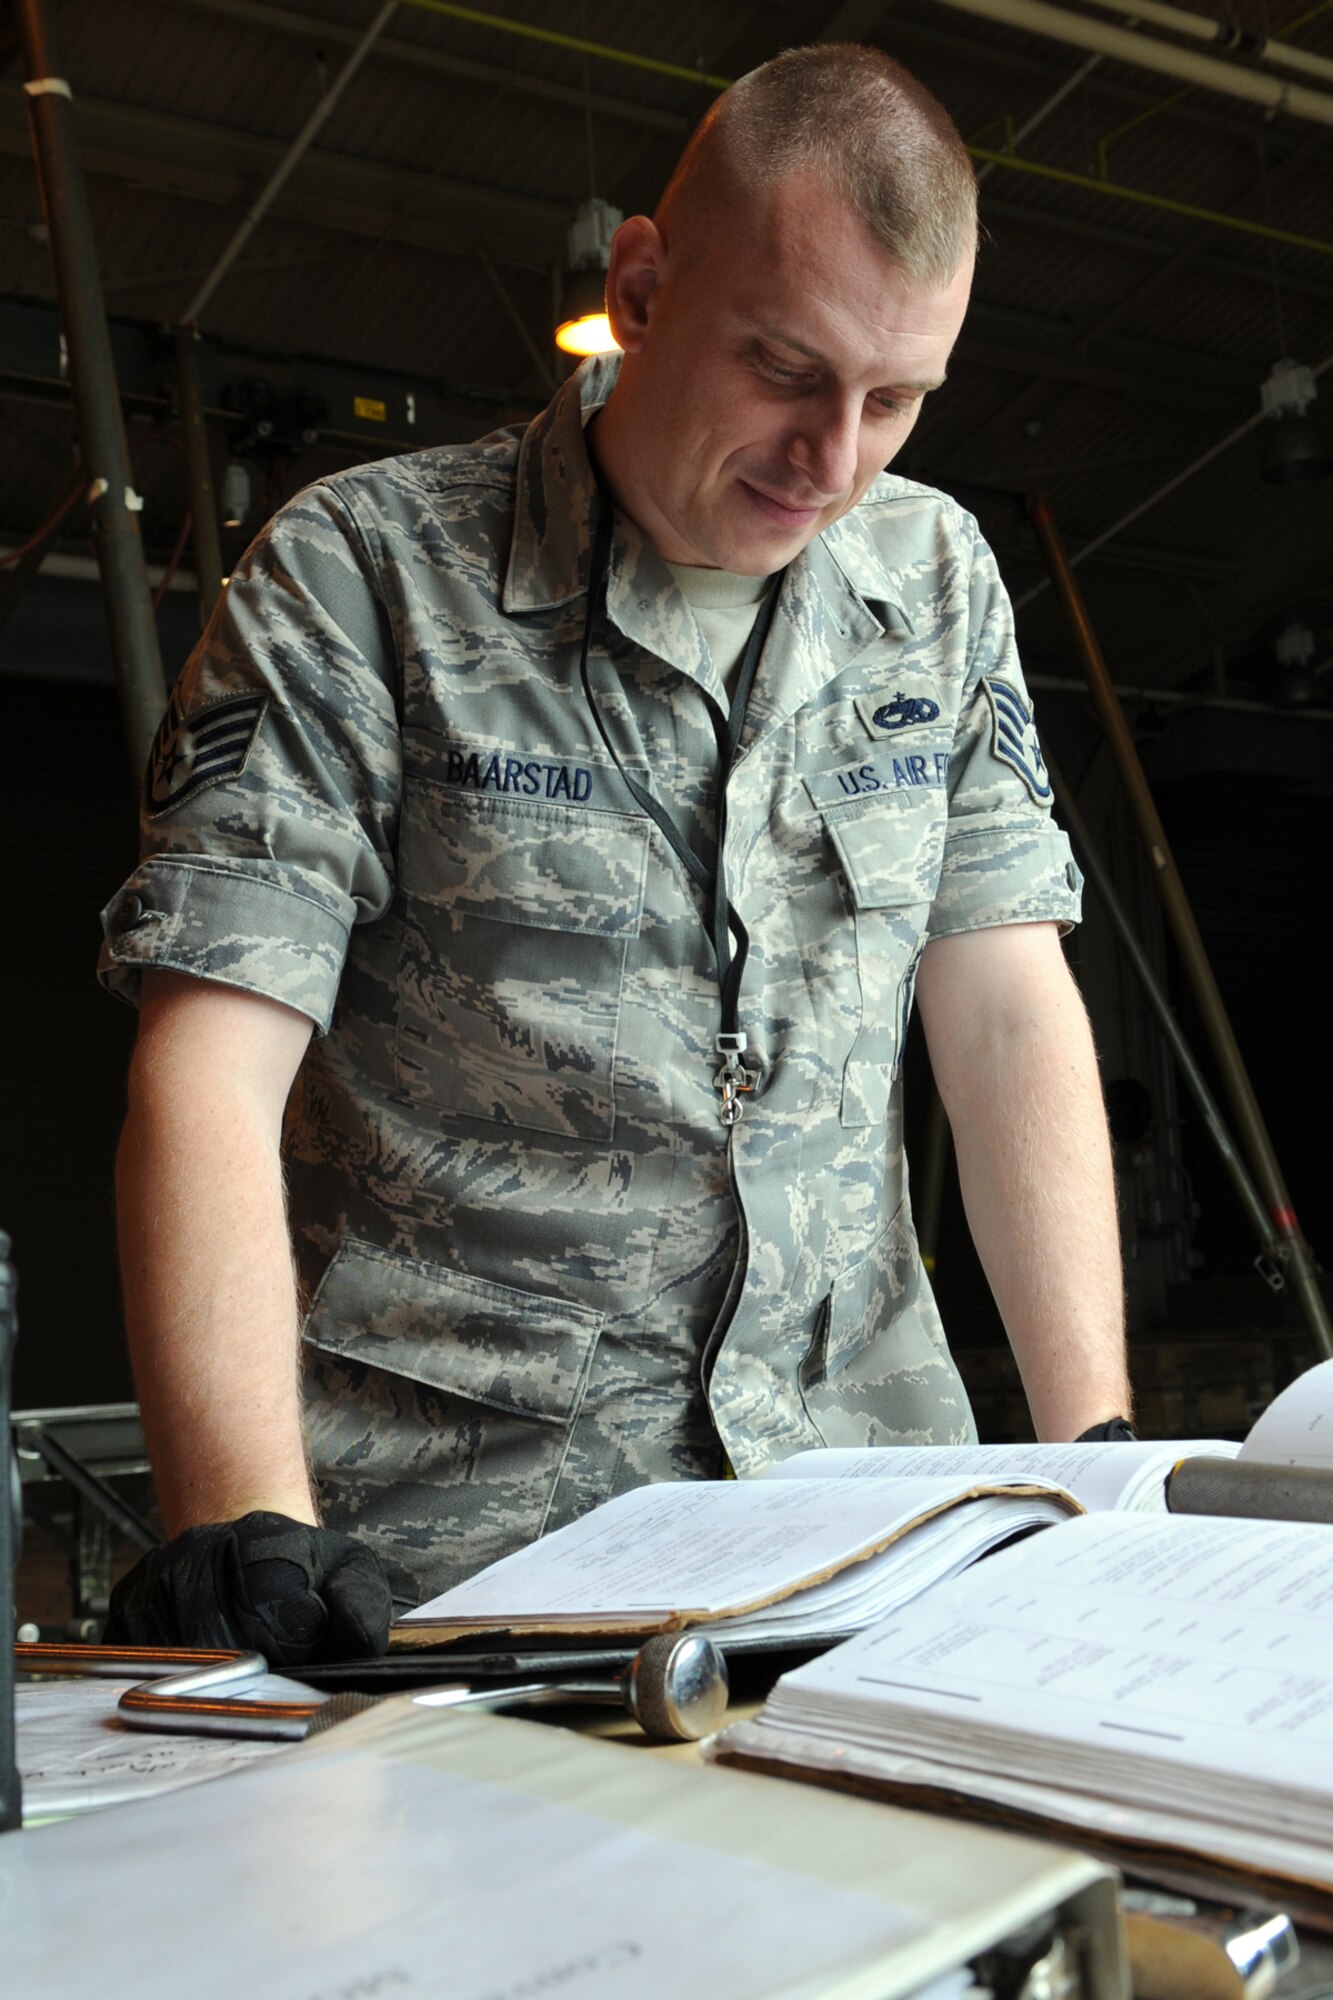 MISAWA AIR BASE, Japan -- Staff Sgt. Robert Baarstad, 35th Maintenance Squadron munitions flight crew chief, reads a technical order prior to building a munition June 9, 2009. Sergeant Baarstad, a native of Boise, Idaho, led a three-man crew in building two GBU-38s for training purposes. (U.S. Air Force photo by Staff Sgt. Rachel Martinez)